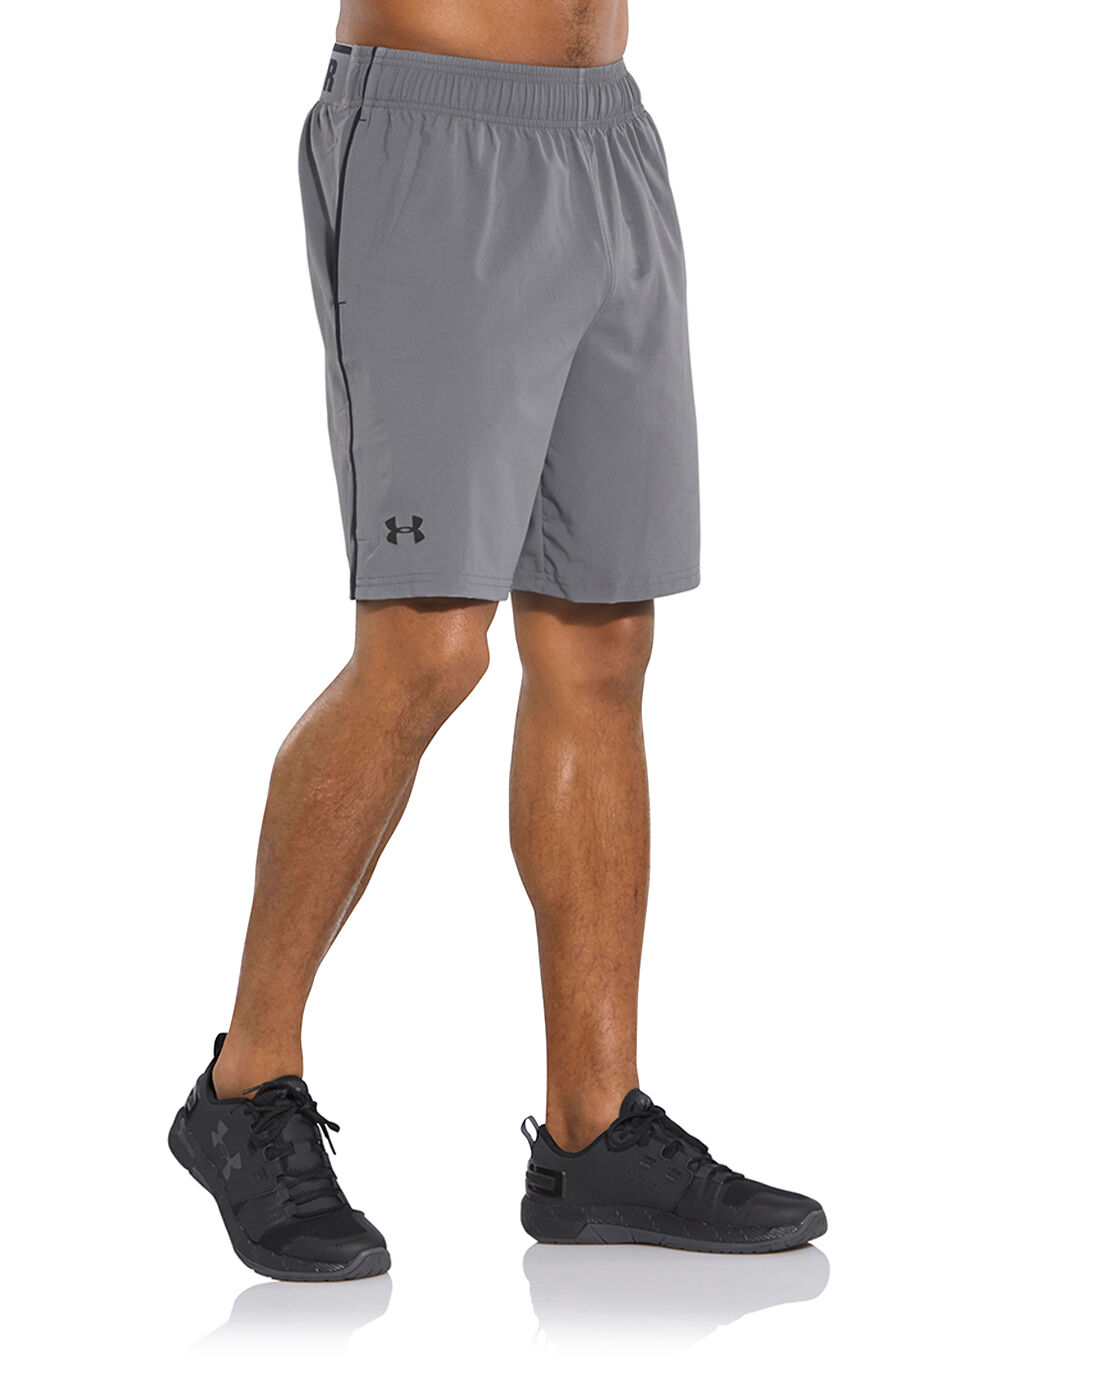 Under Armour Mens Mirage Shorts